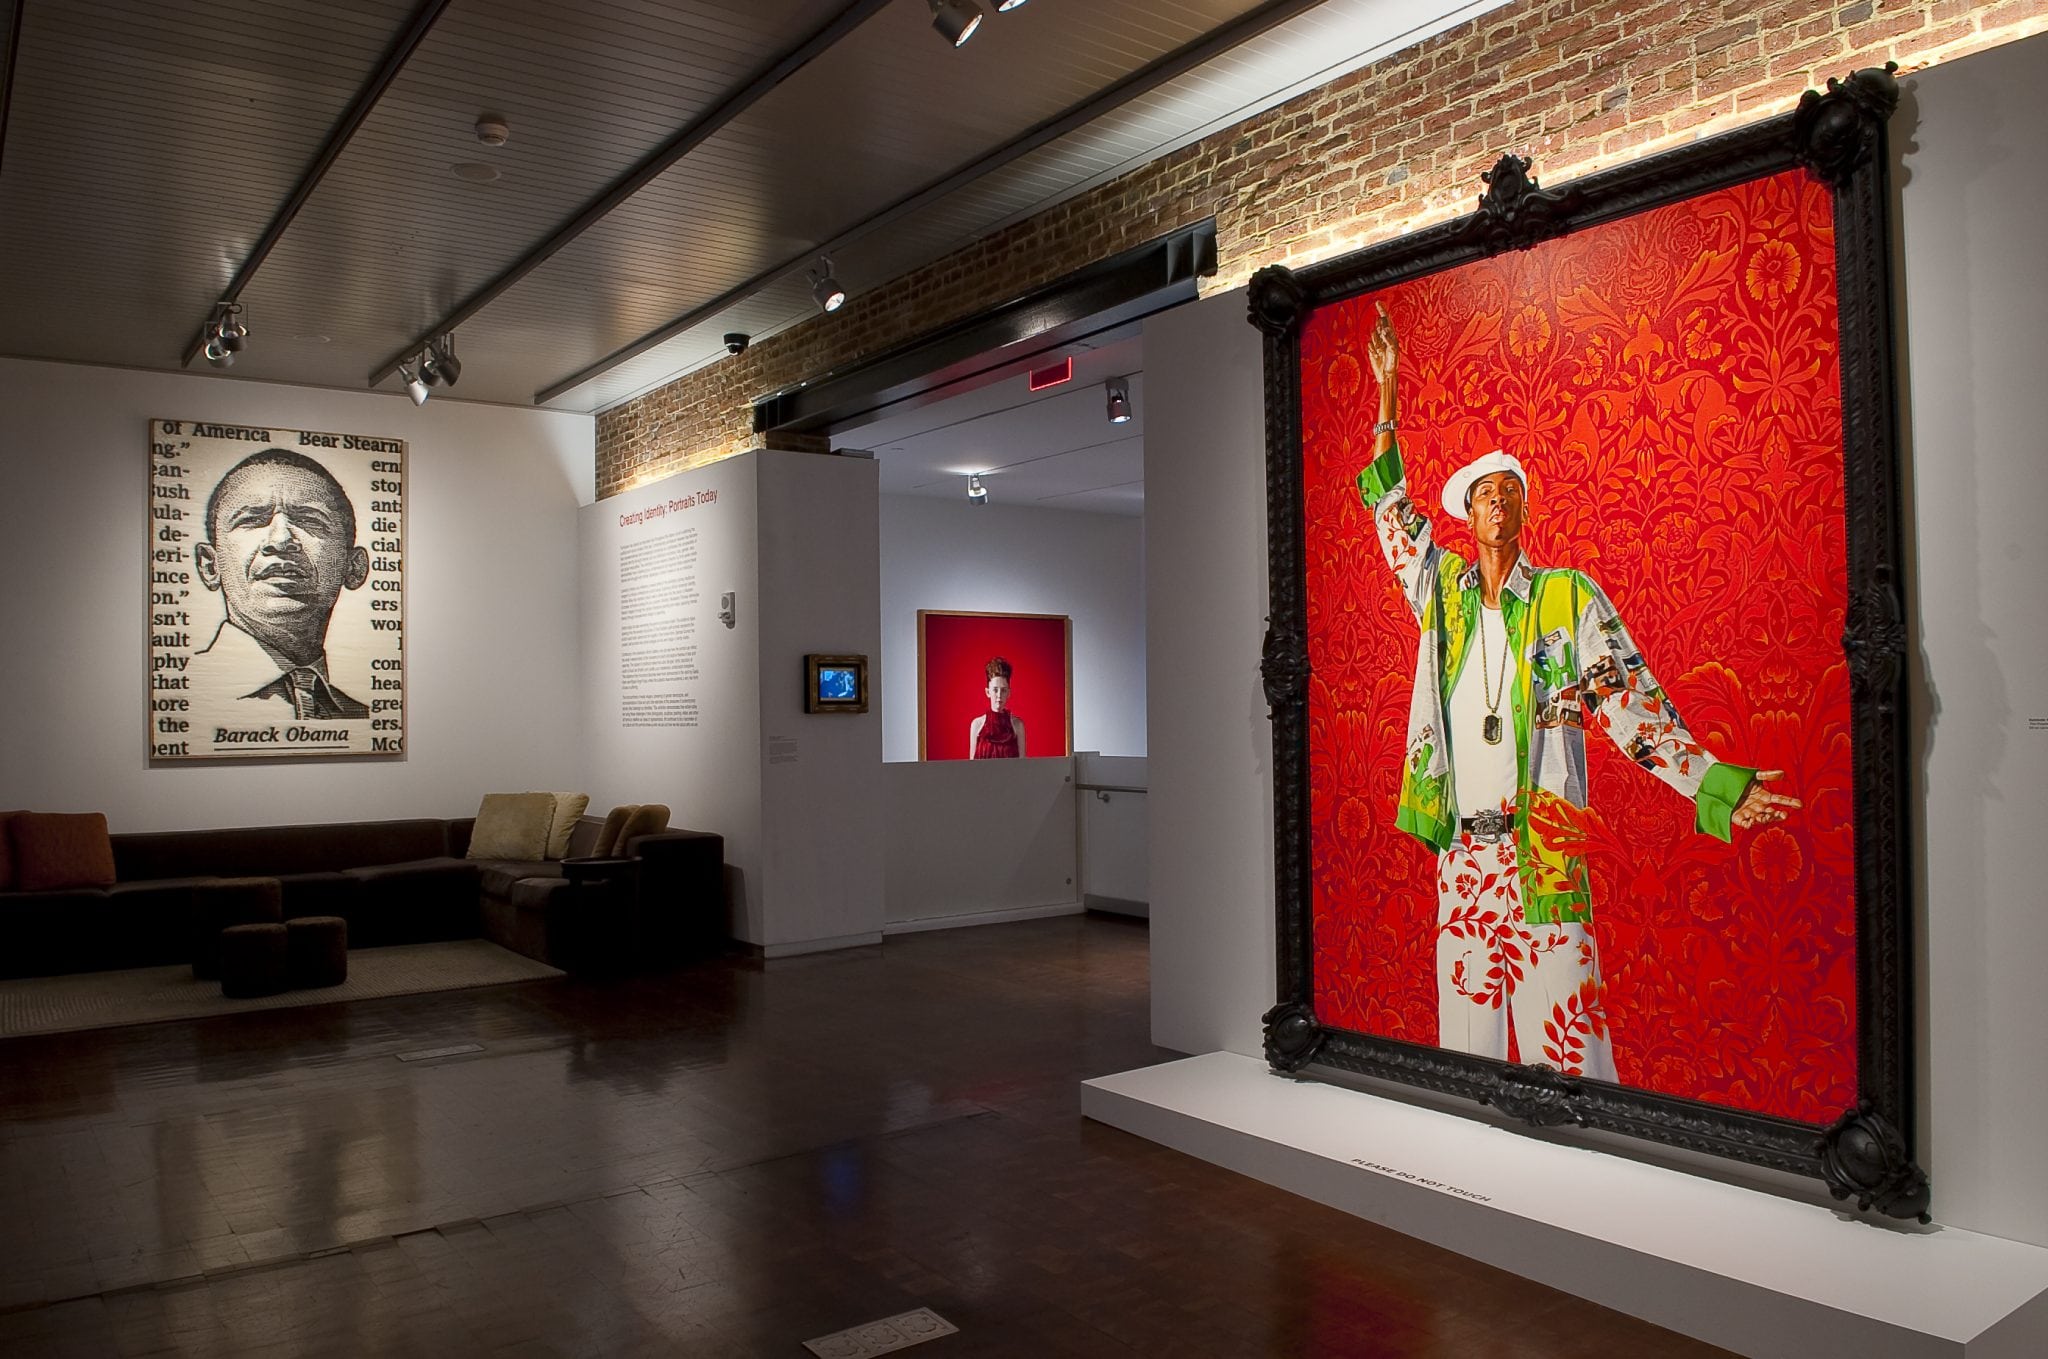 The street level gallery at the 21C Hotel and Museum in Louisville, Kentucky.